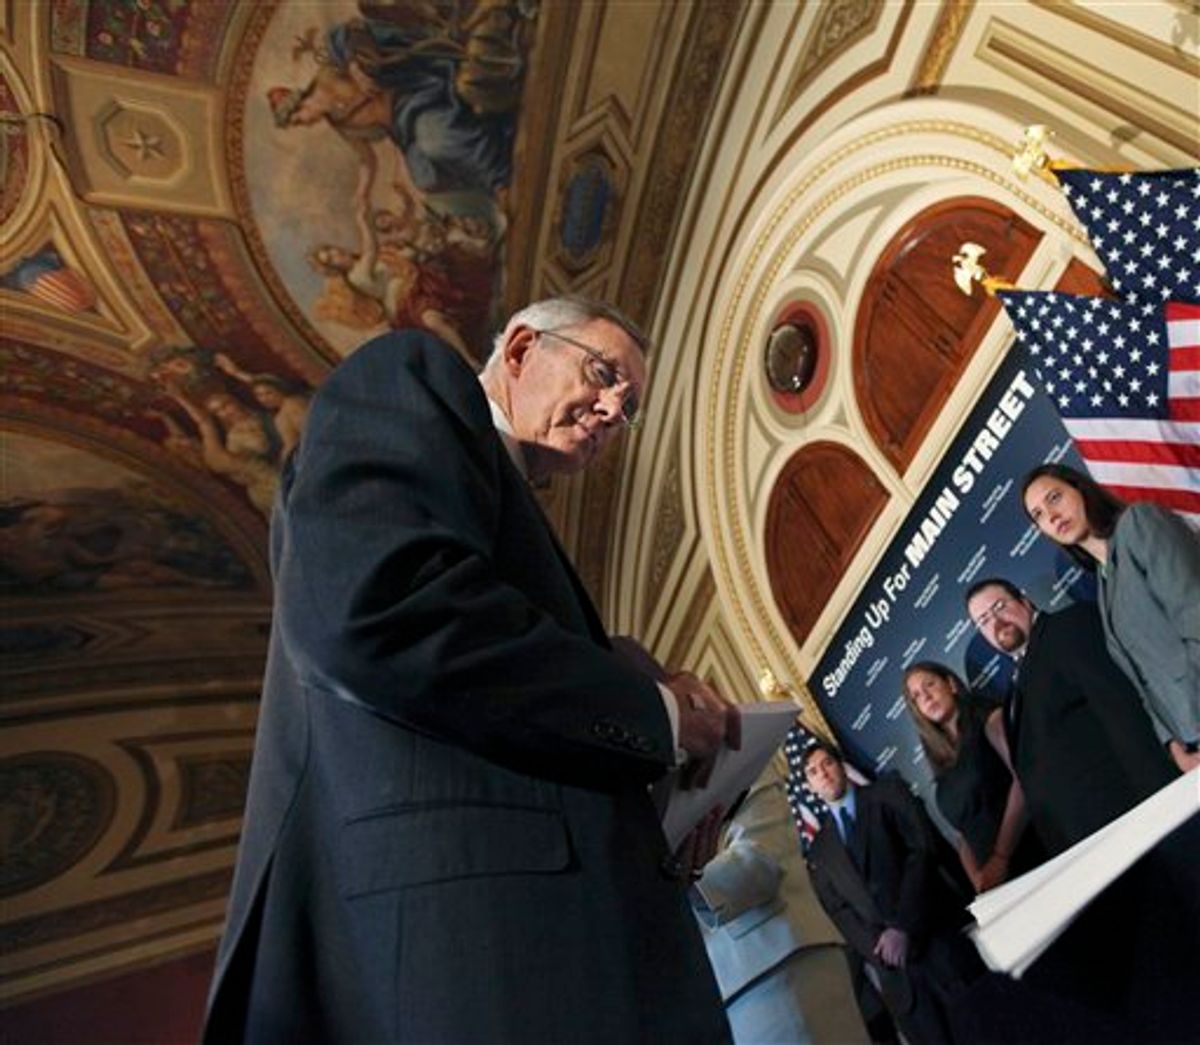 Senate Majority Leader Harry Reid of Nev., looks at signed petition papers on a table in support of a strong financial reform, during a news conference discussing Wall Street accountability legislation, Wednesday, May 5, 2010, on Capitol Hill in Washington.   (AP Photo/Manuel Balce Ceneta) (AP)